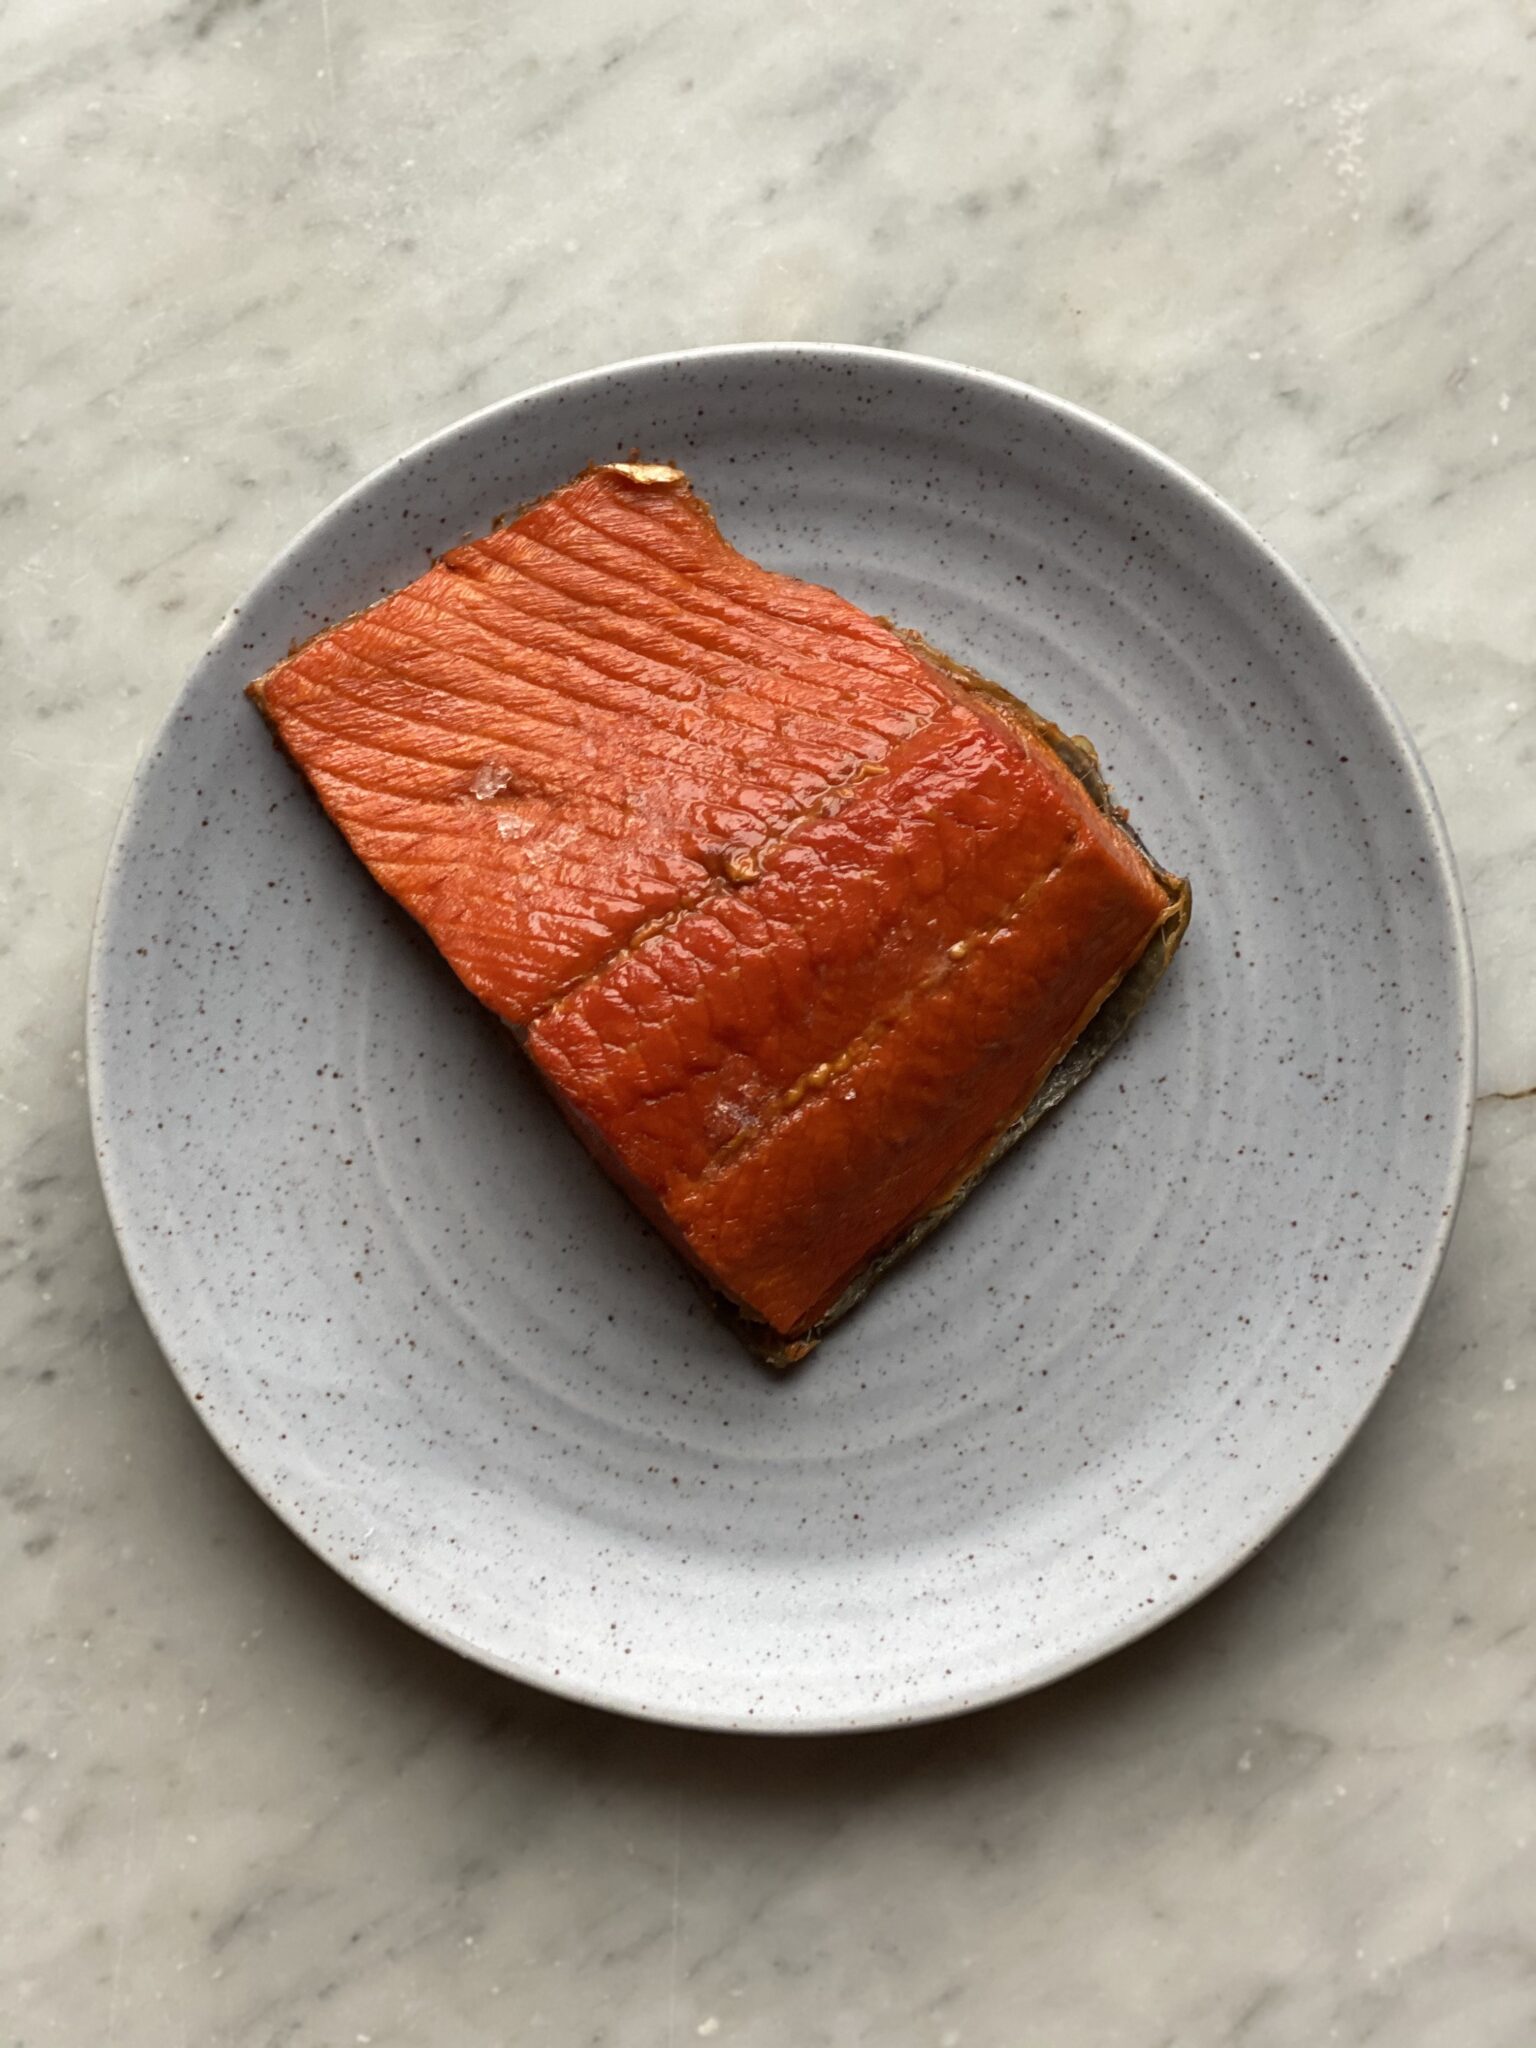 A piece of smoked salmon on a plate